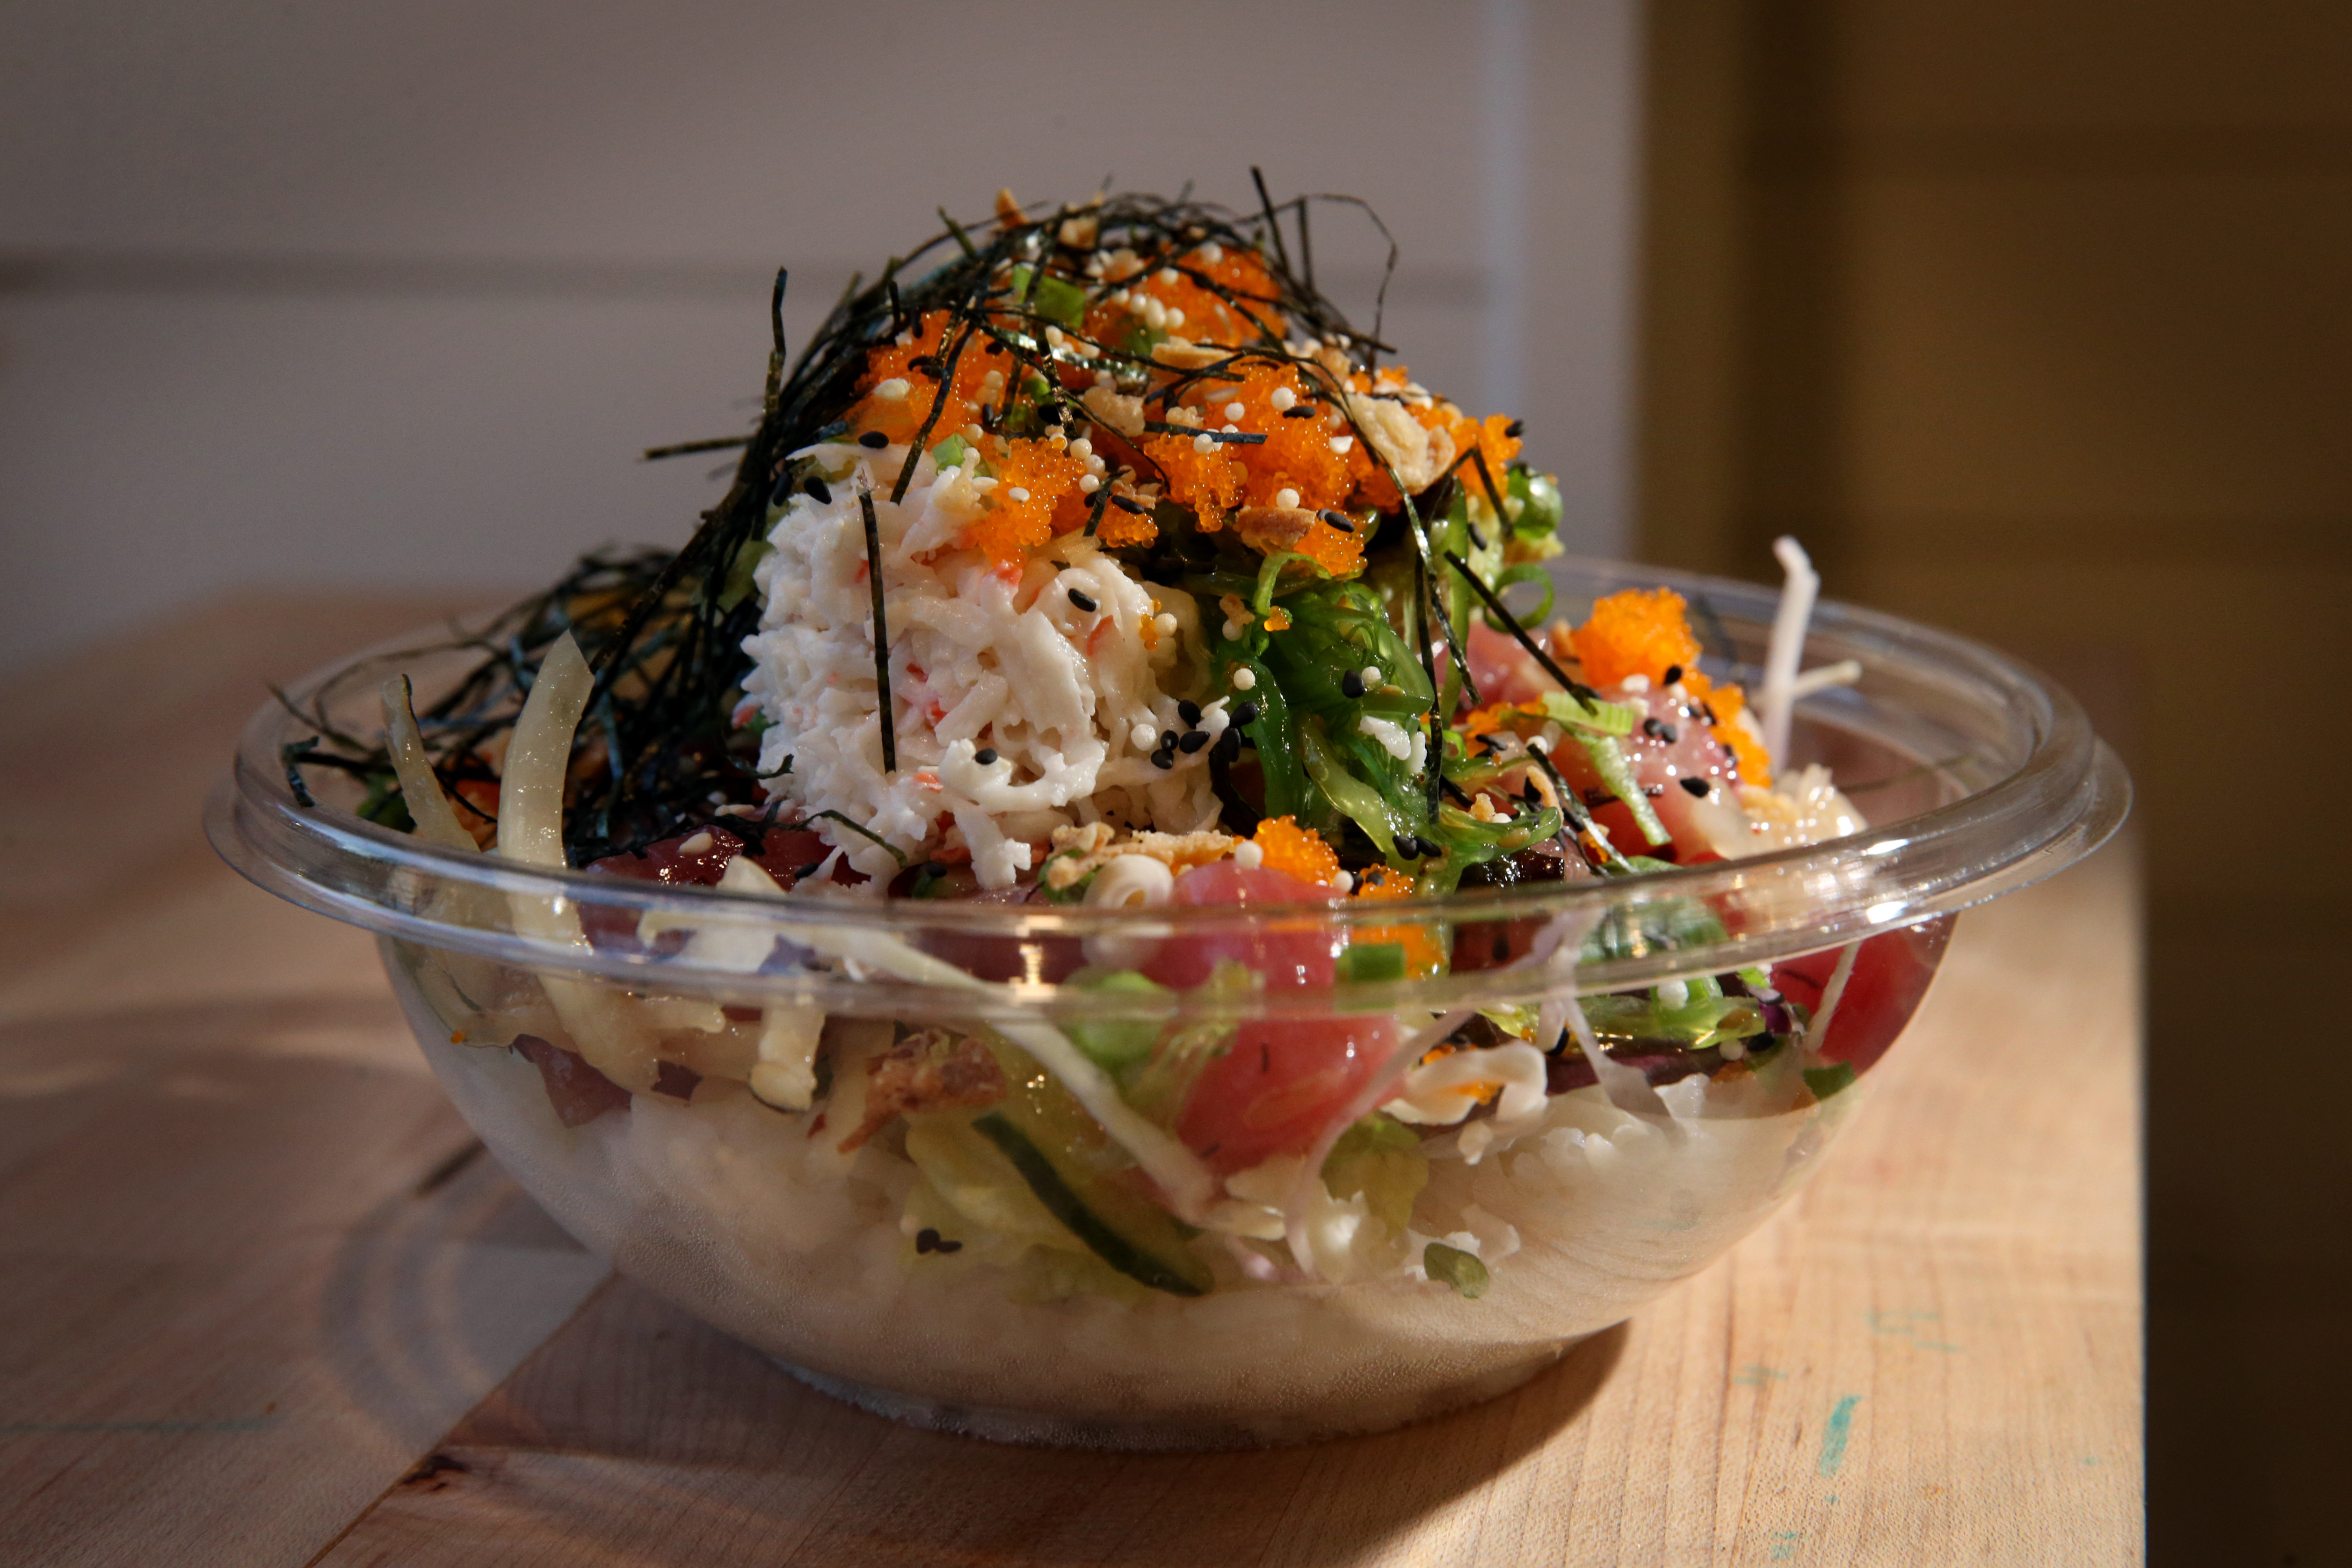 Why Poke Is Emerging as the Next Fast-Casual Restaurant Phenomenon